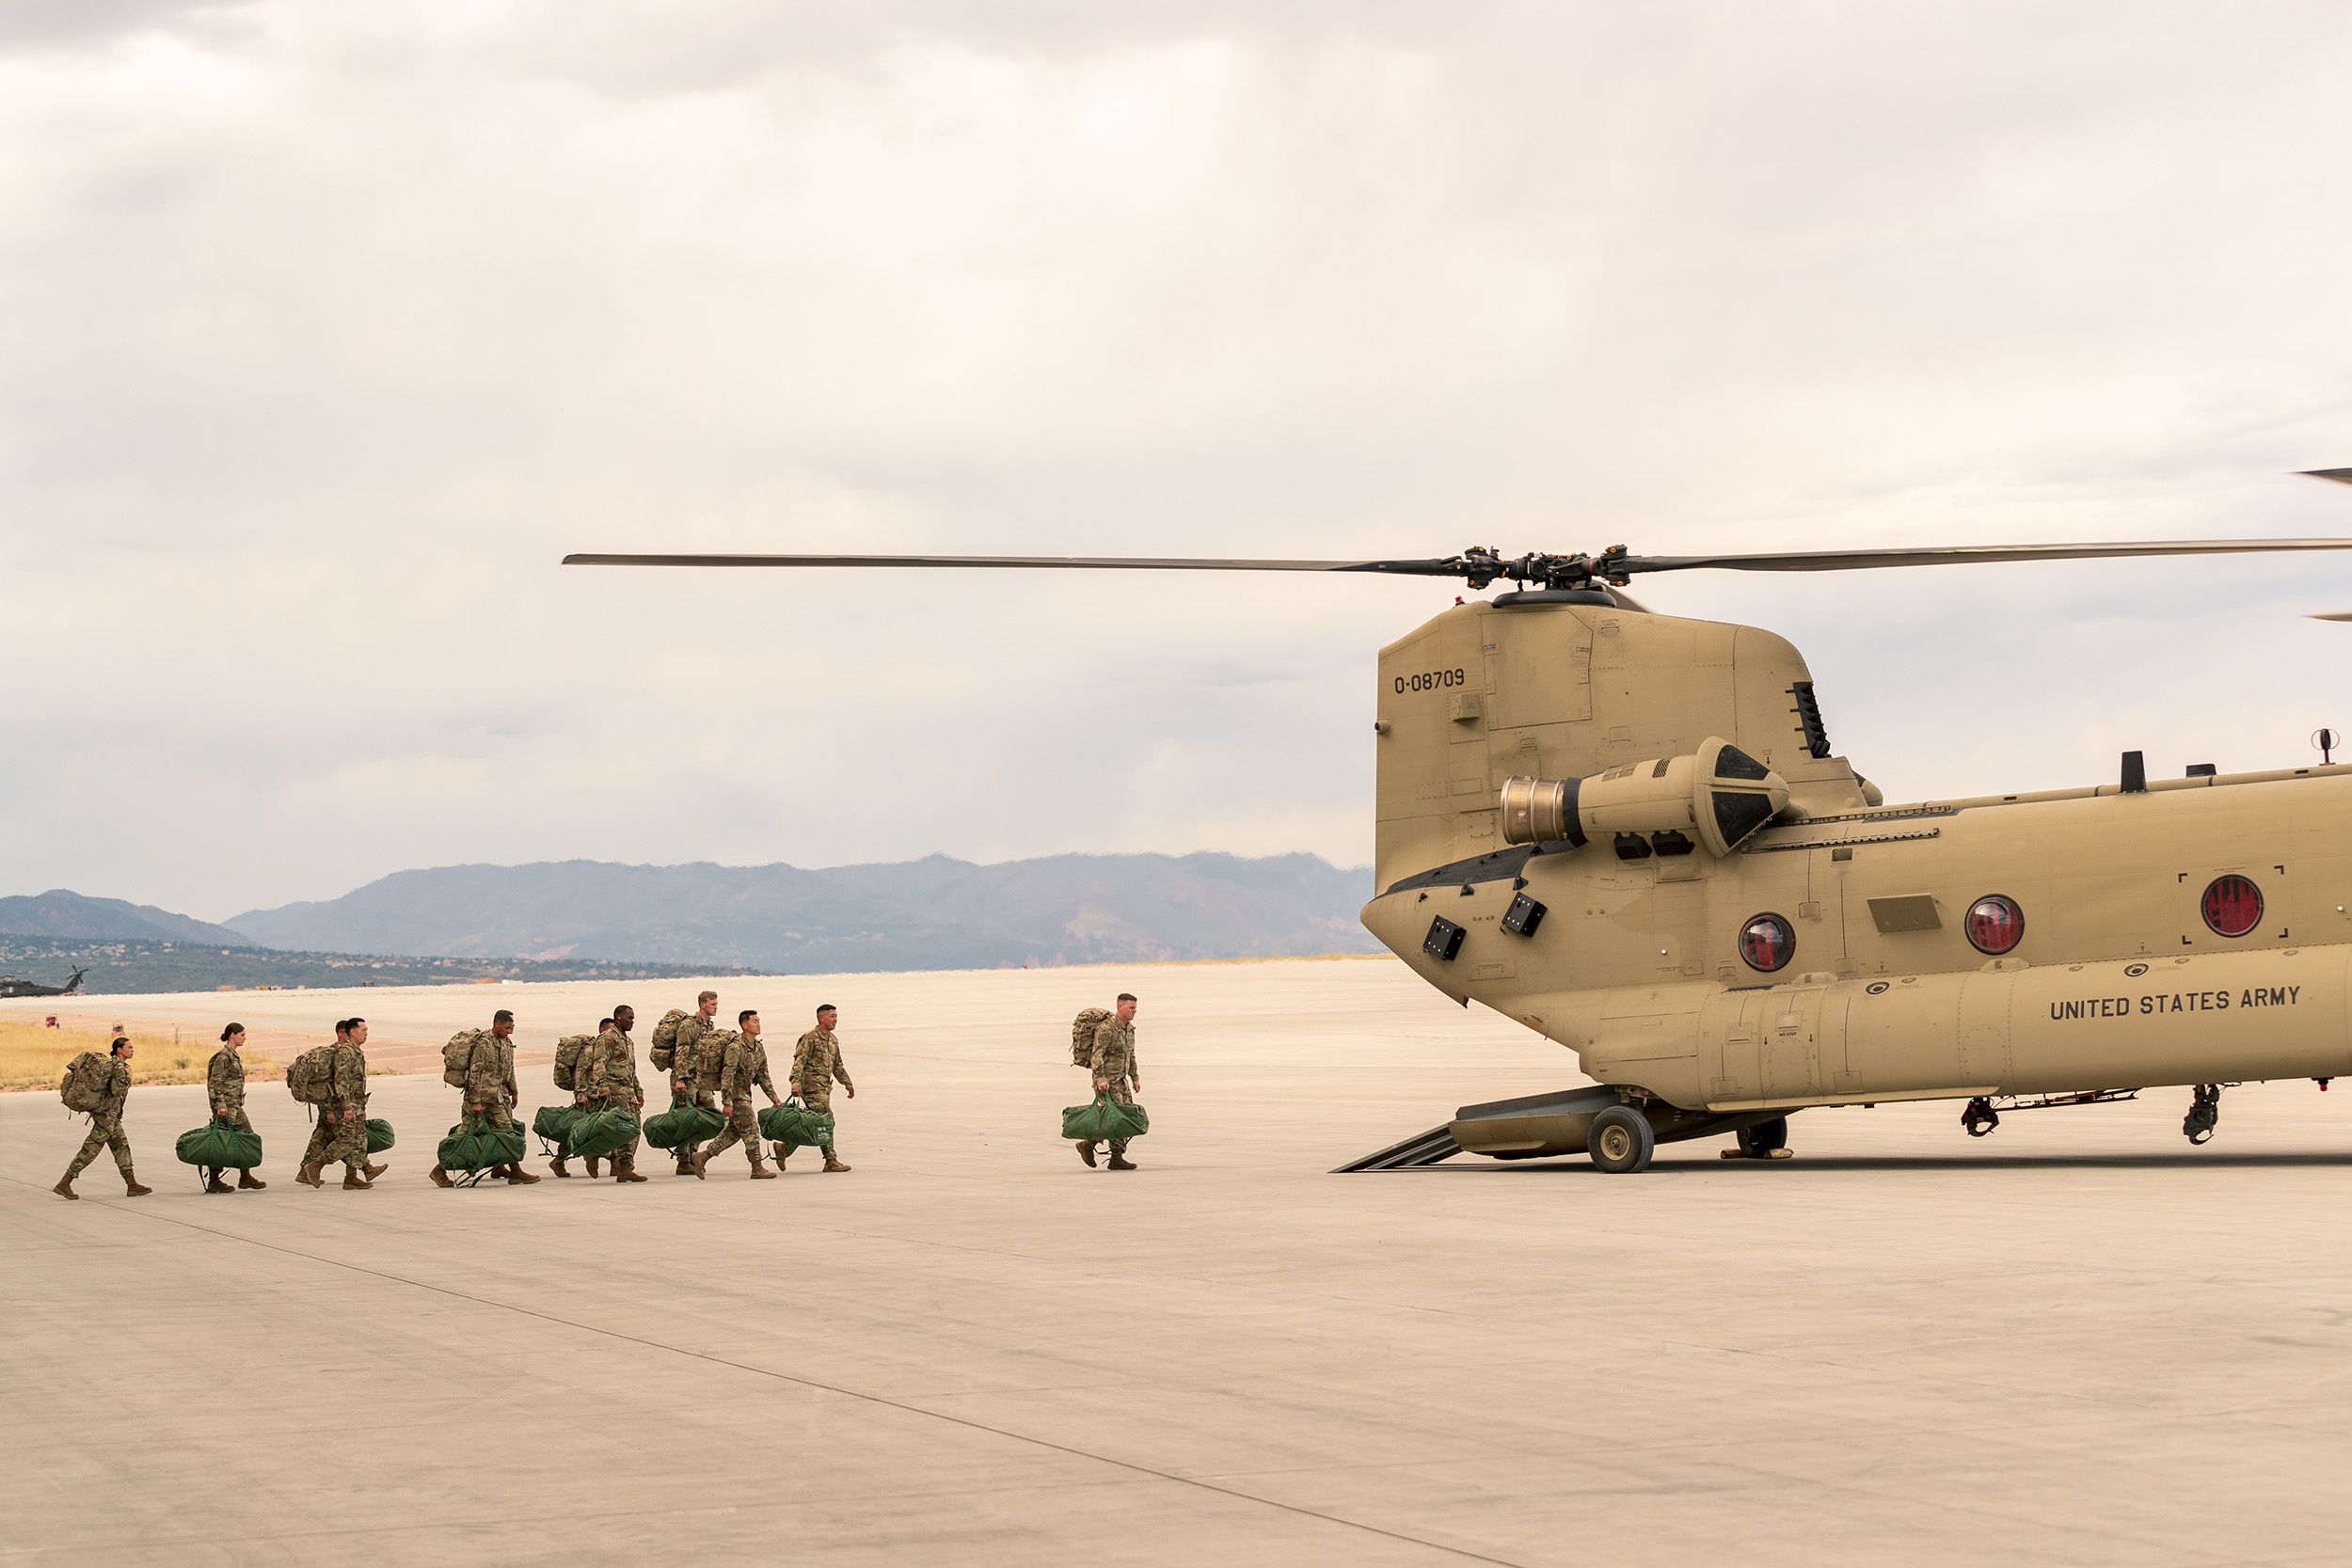 Soldiers loading in Chinook Helicopter on Army Base